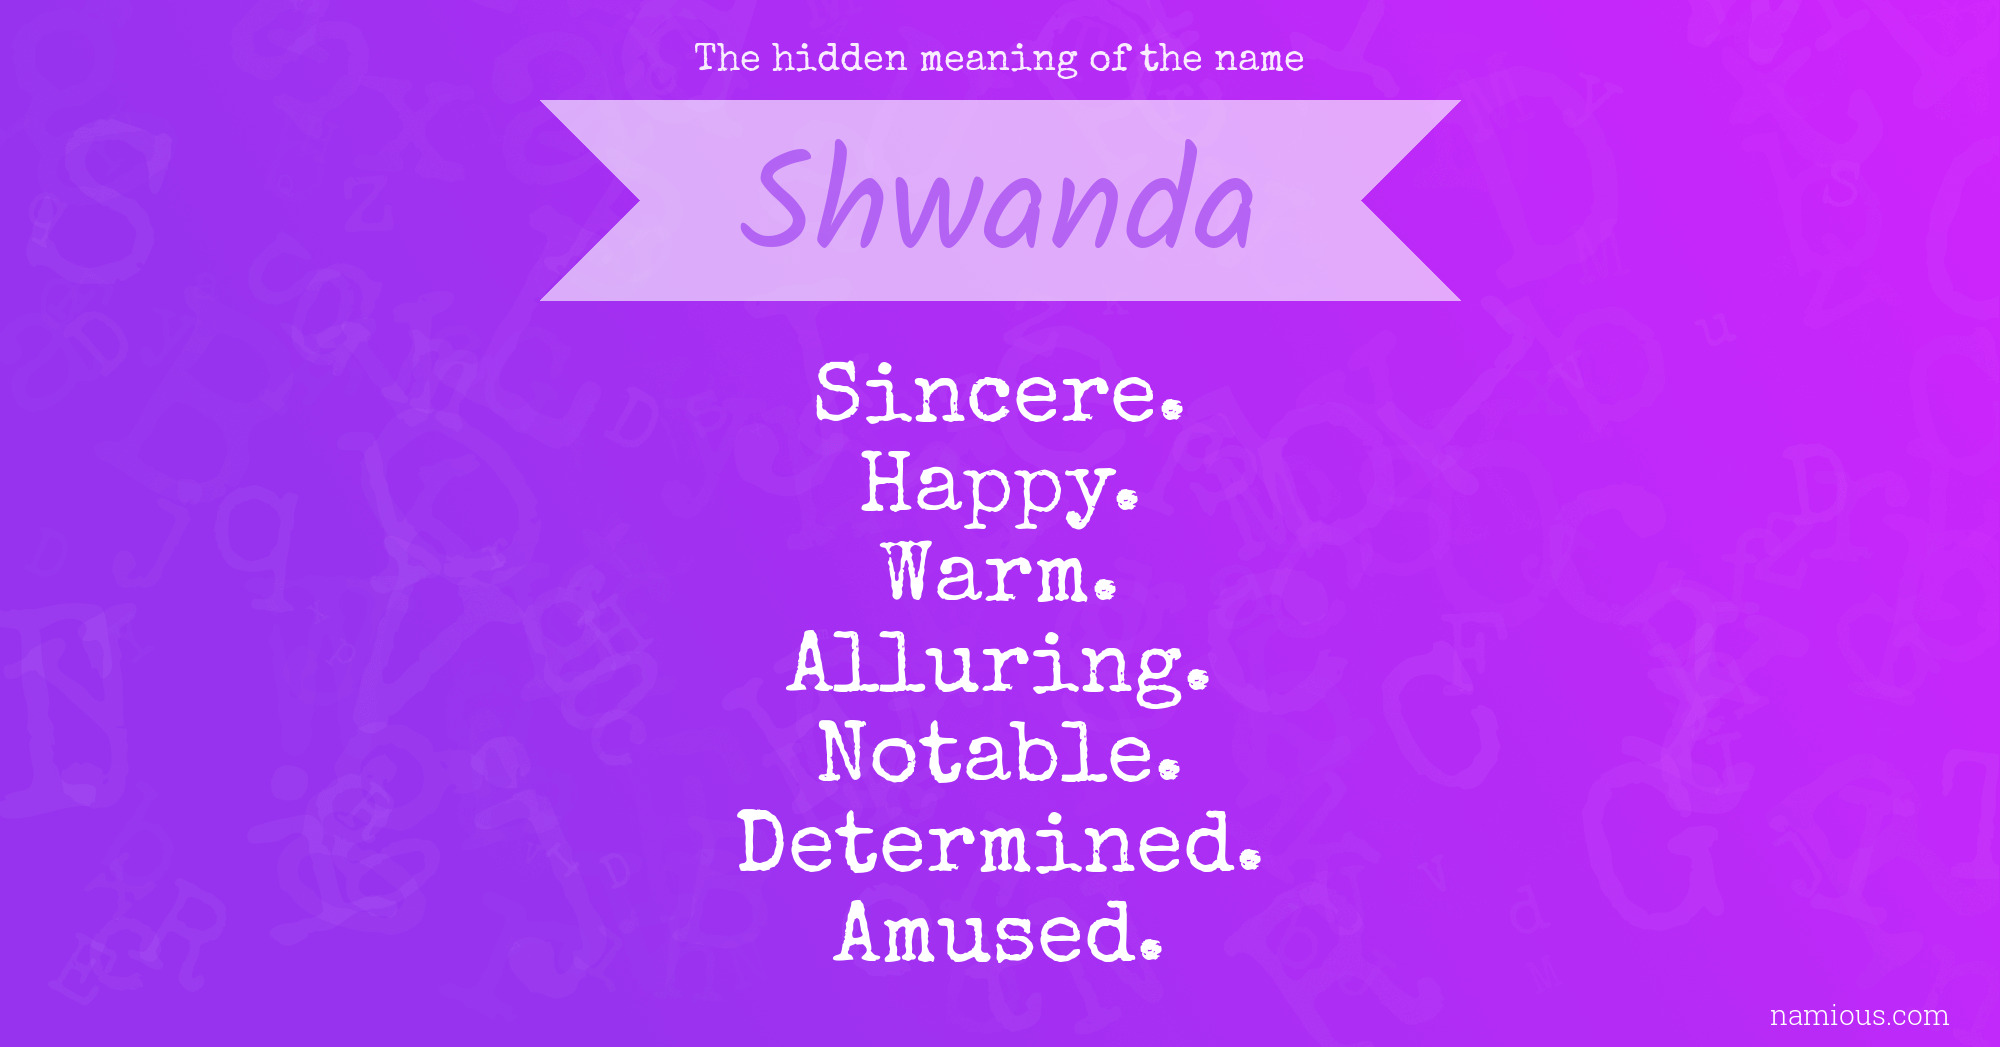 The hidden meaning of the name Shwanda